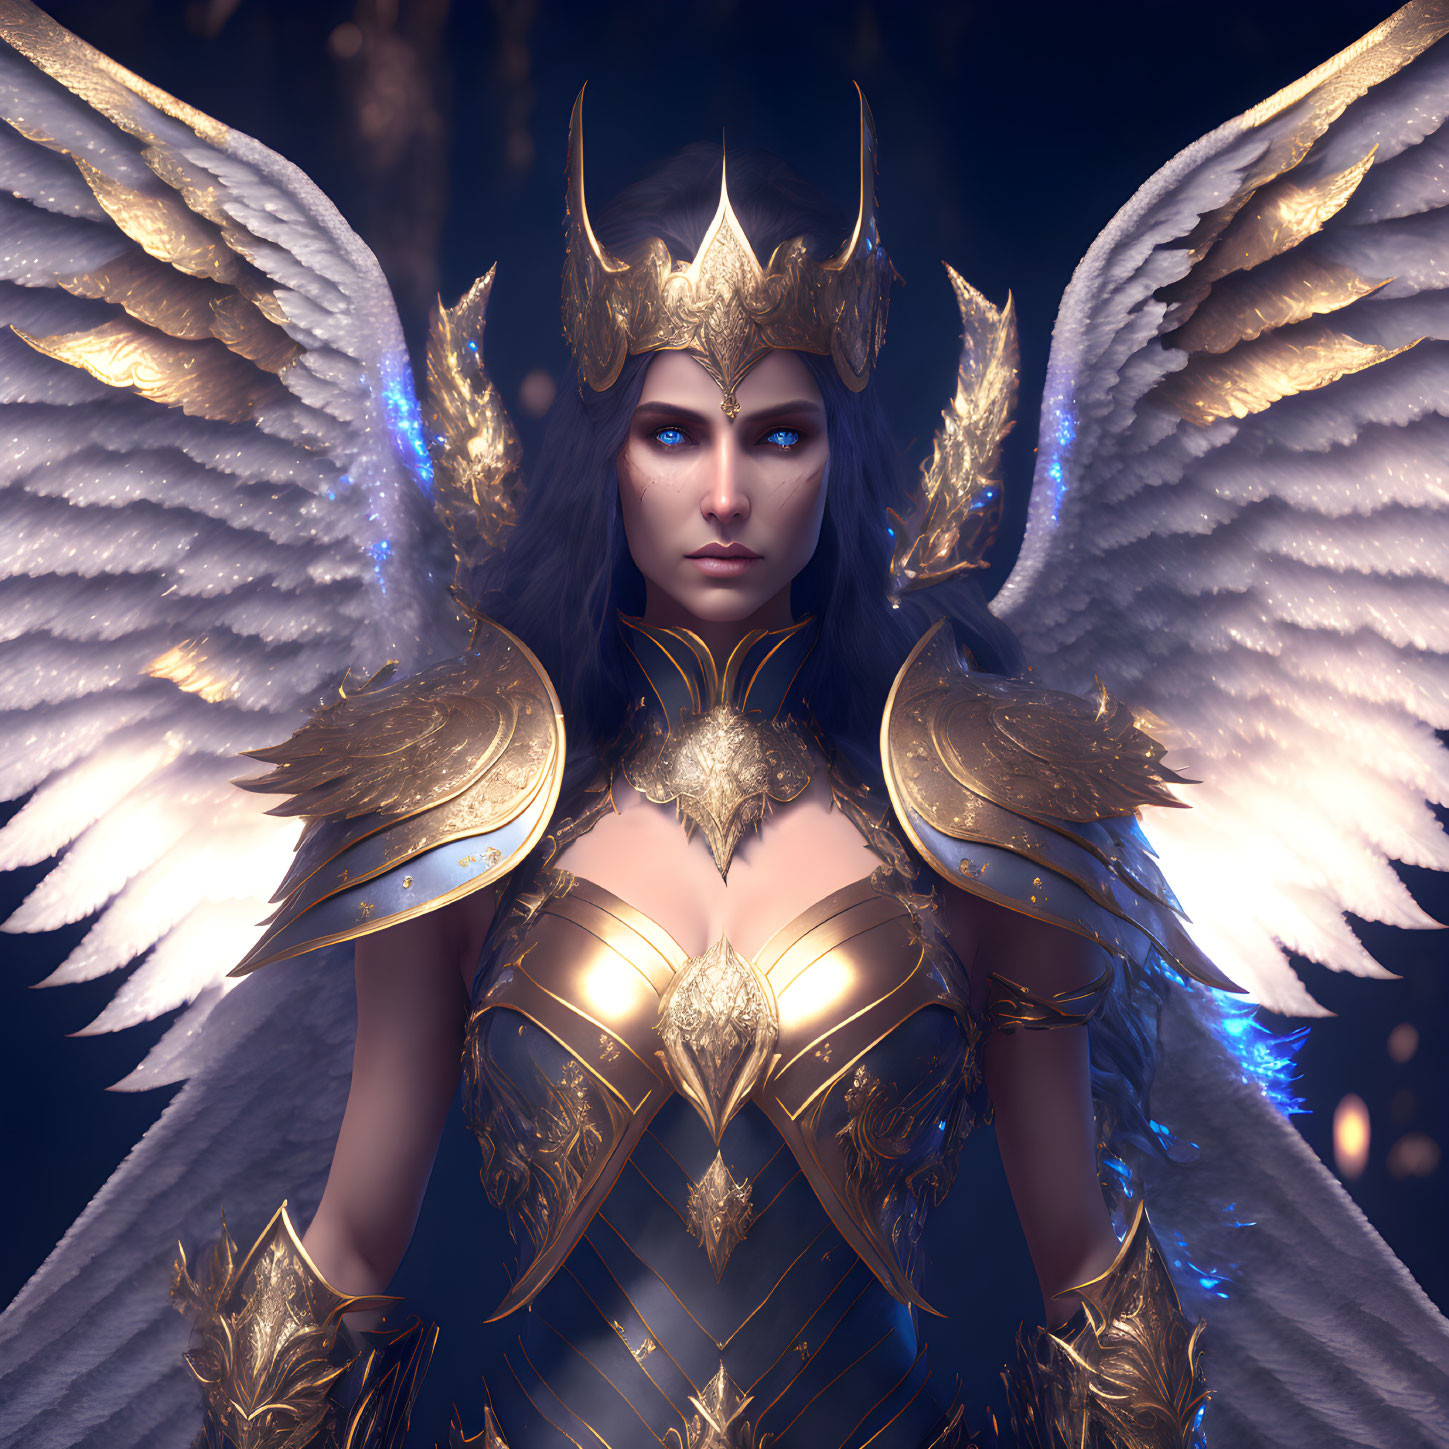 Majestic figure in golden armor with white wings and helmet